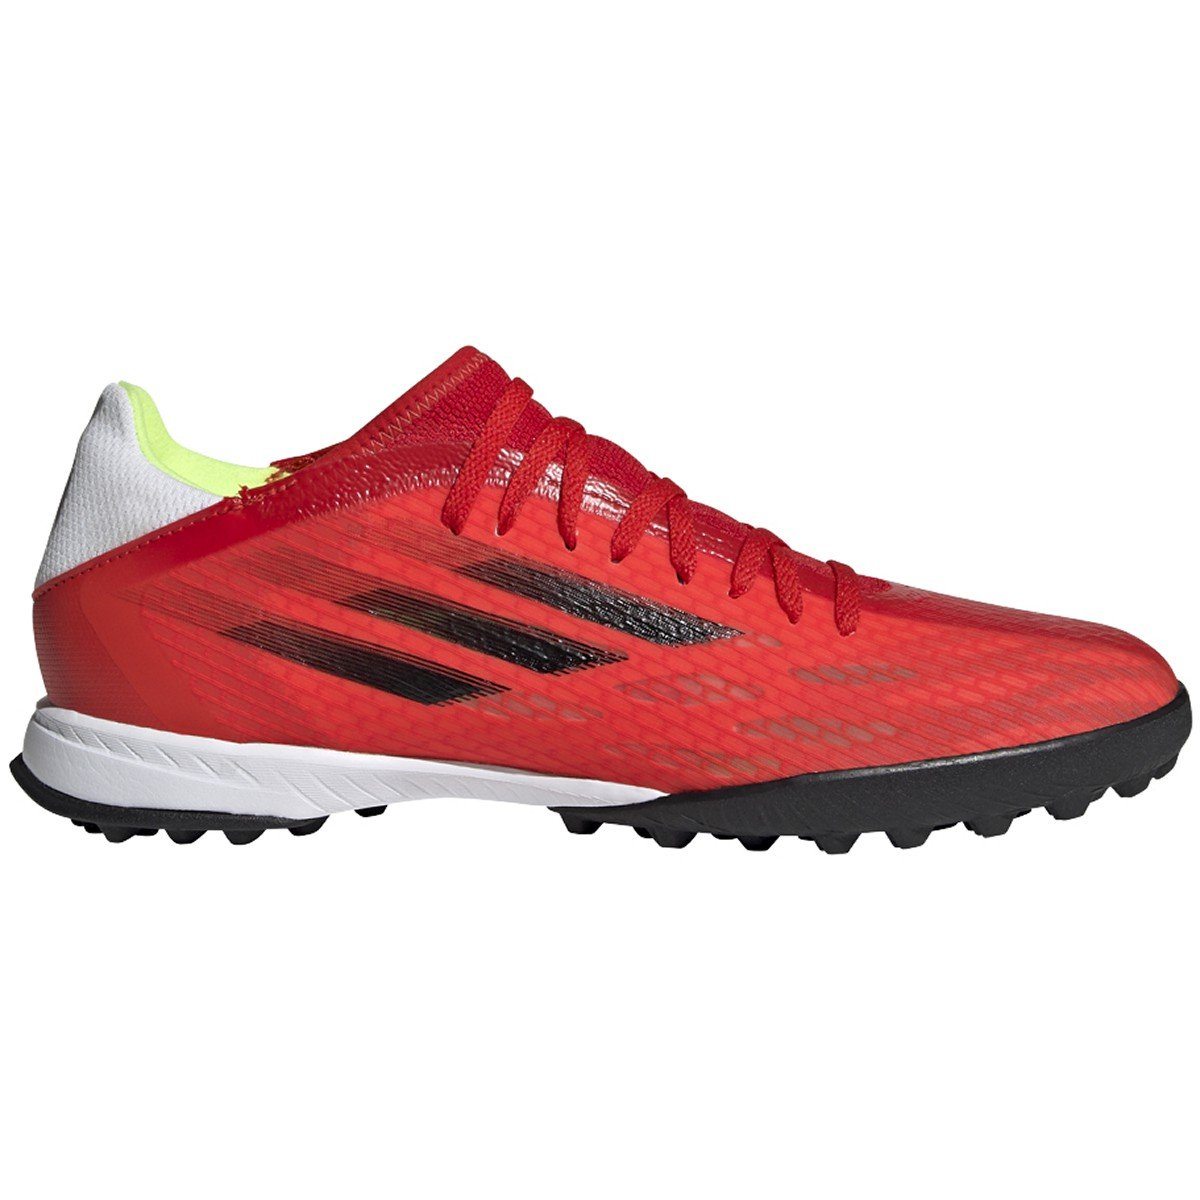 adidas X 16.3 Firm Ground Soccer Shoes